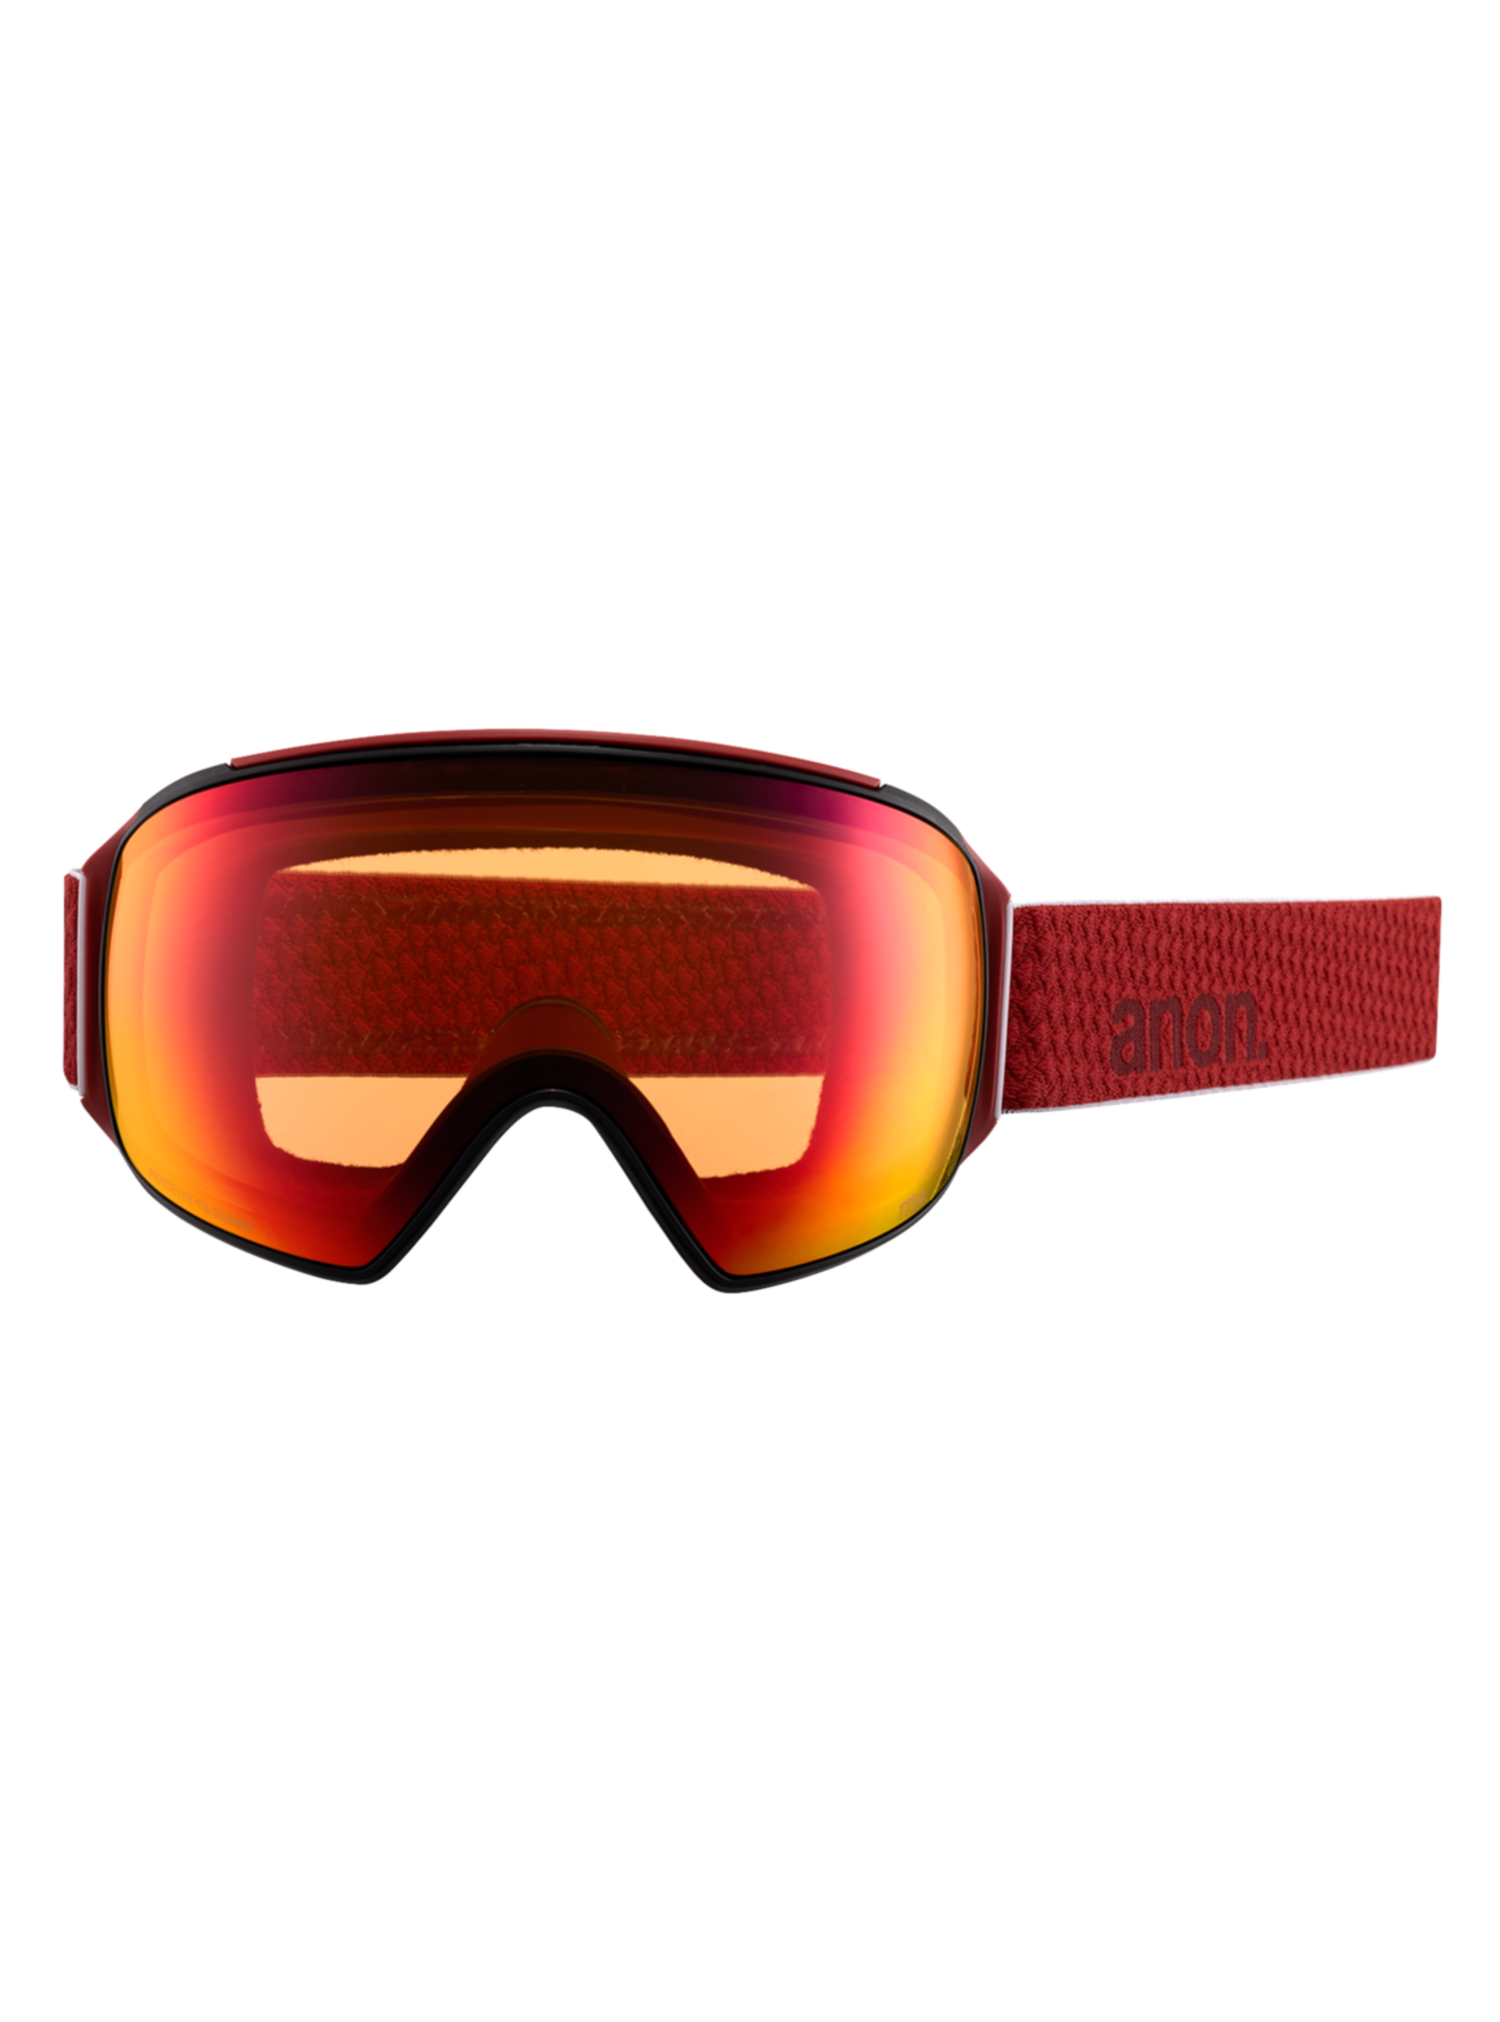 ANON M4 Toric Goggles Mars / Perceive Sunny Red / Perceive Cloudy 